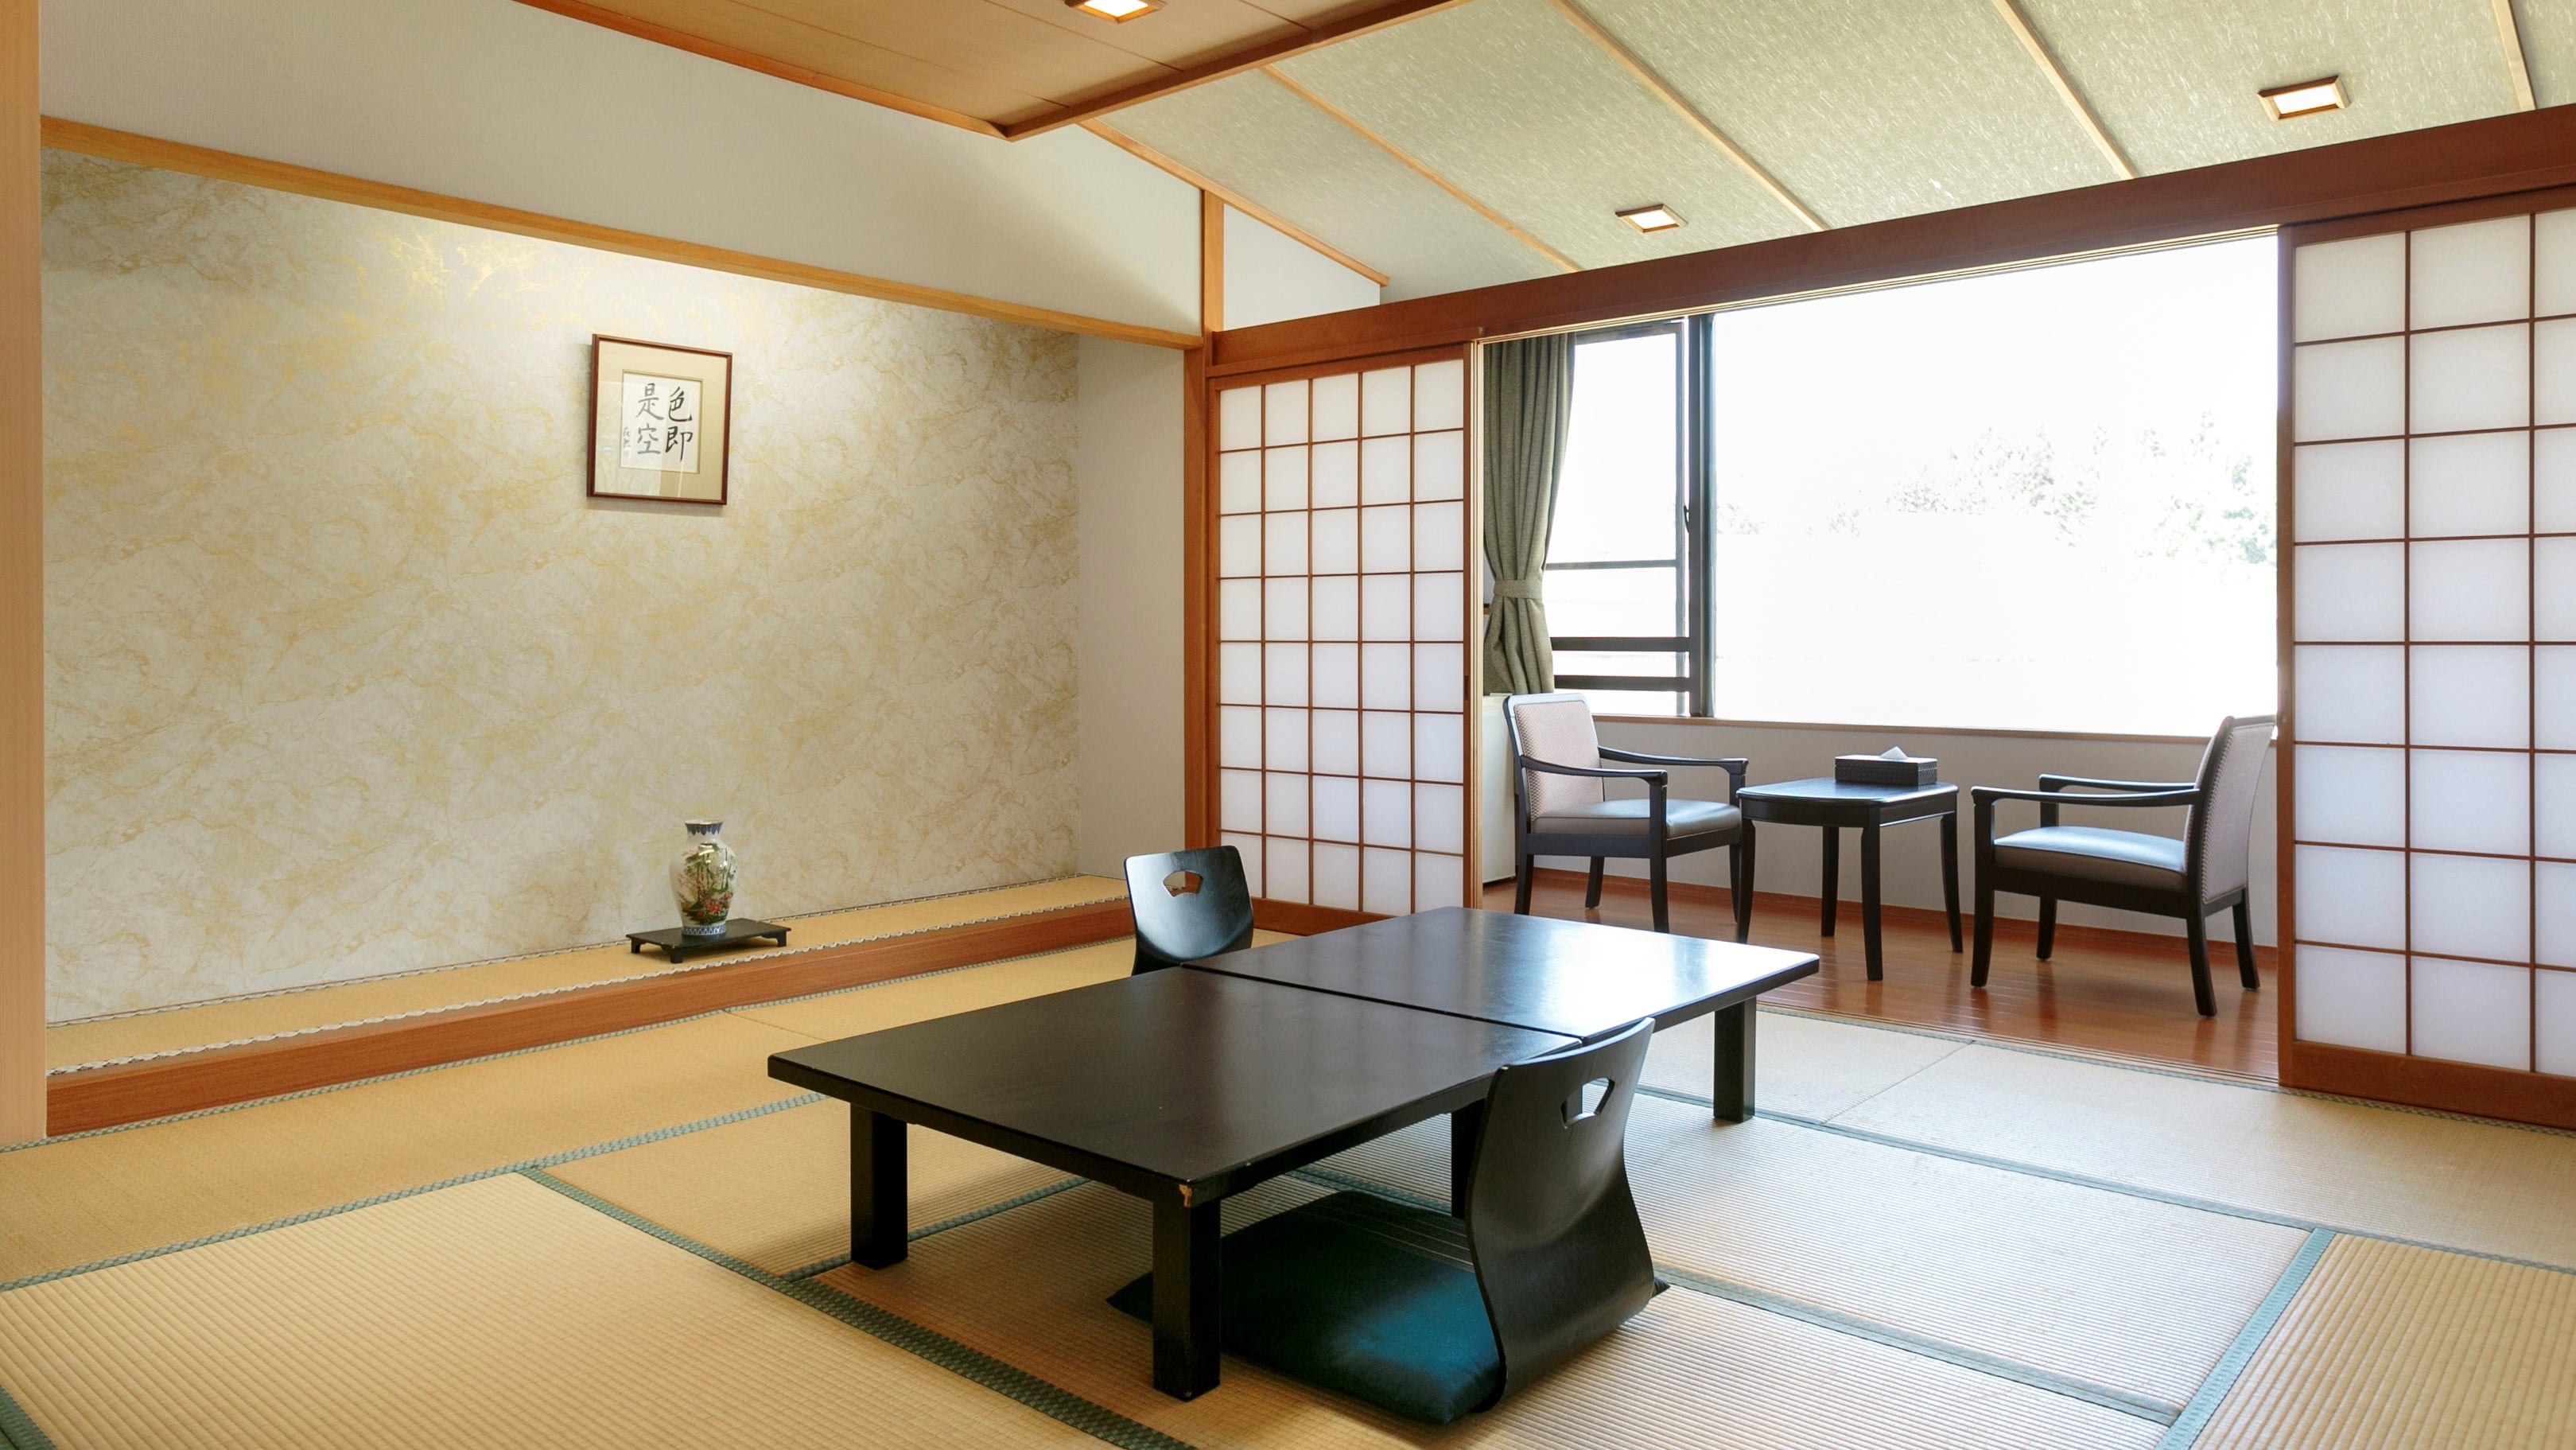 Rindokan [Relaxing Japanese-style room] "With bath and toilet" (non-smoking)